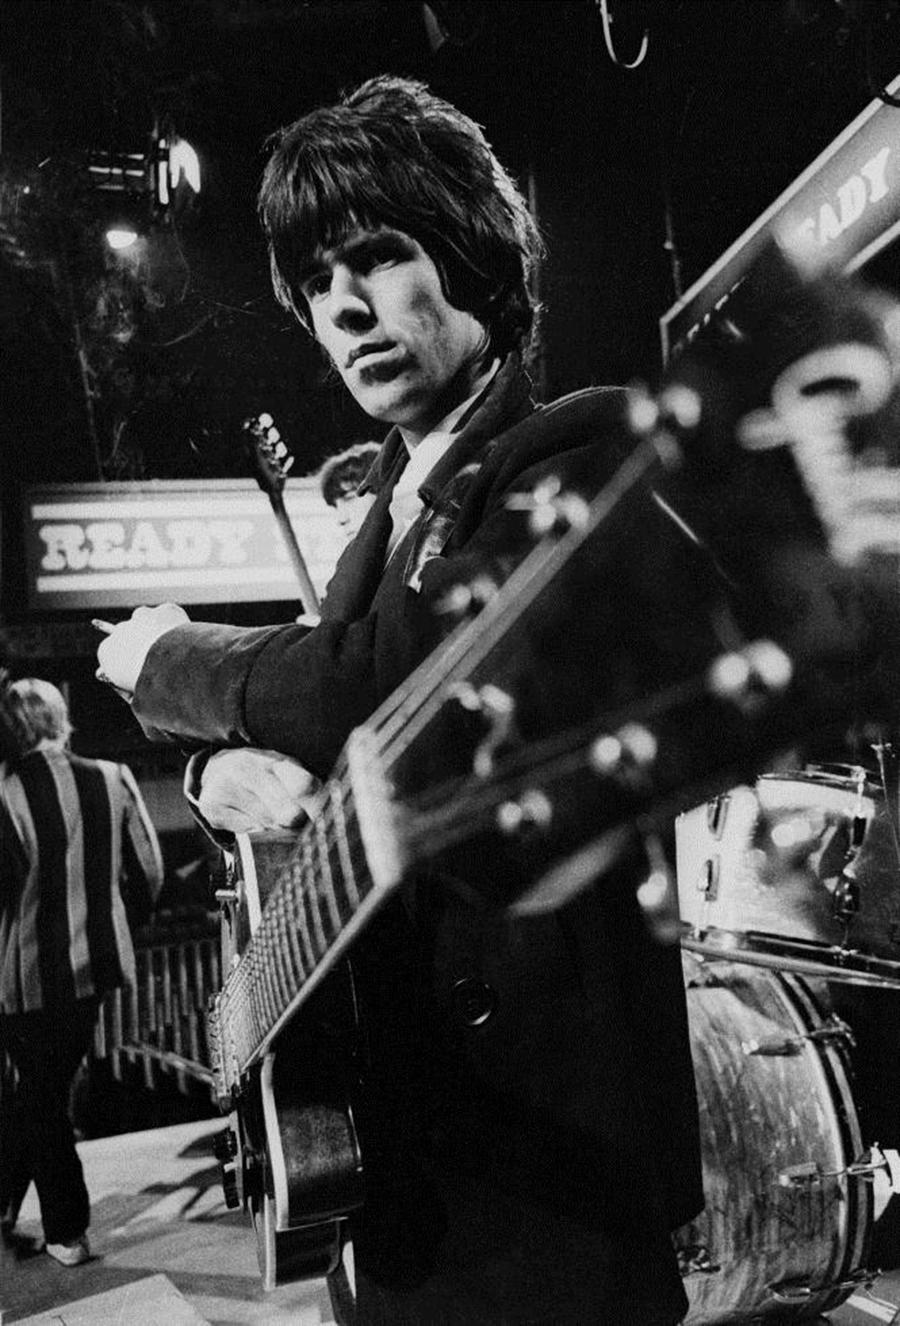 Barrie Wentzell Black and White Photograph - Keith Richards, The Rolling Stones, Ready Steady Go!, London, 1966